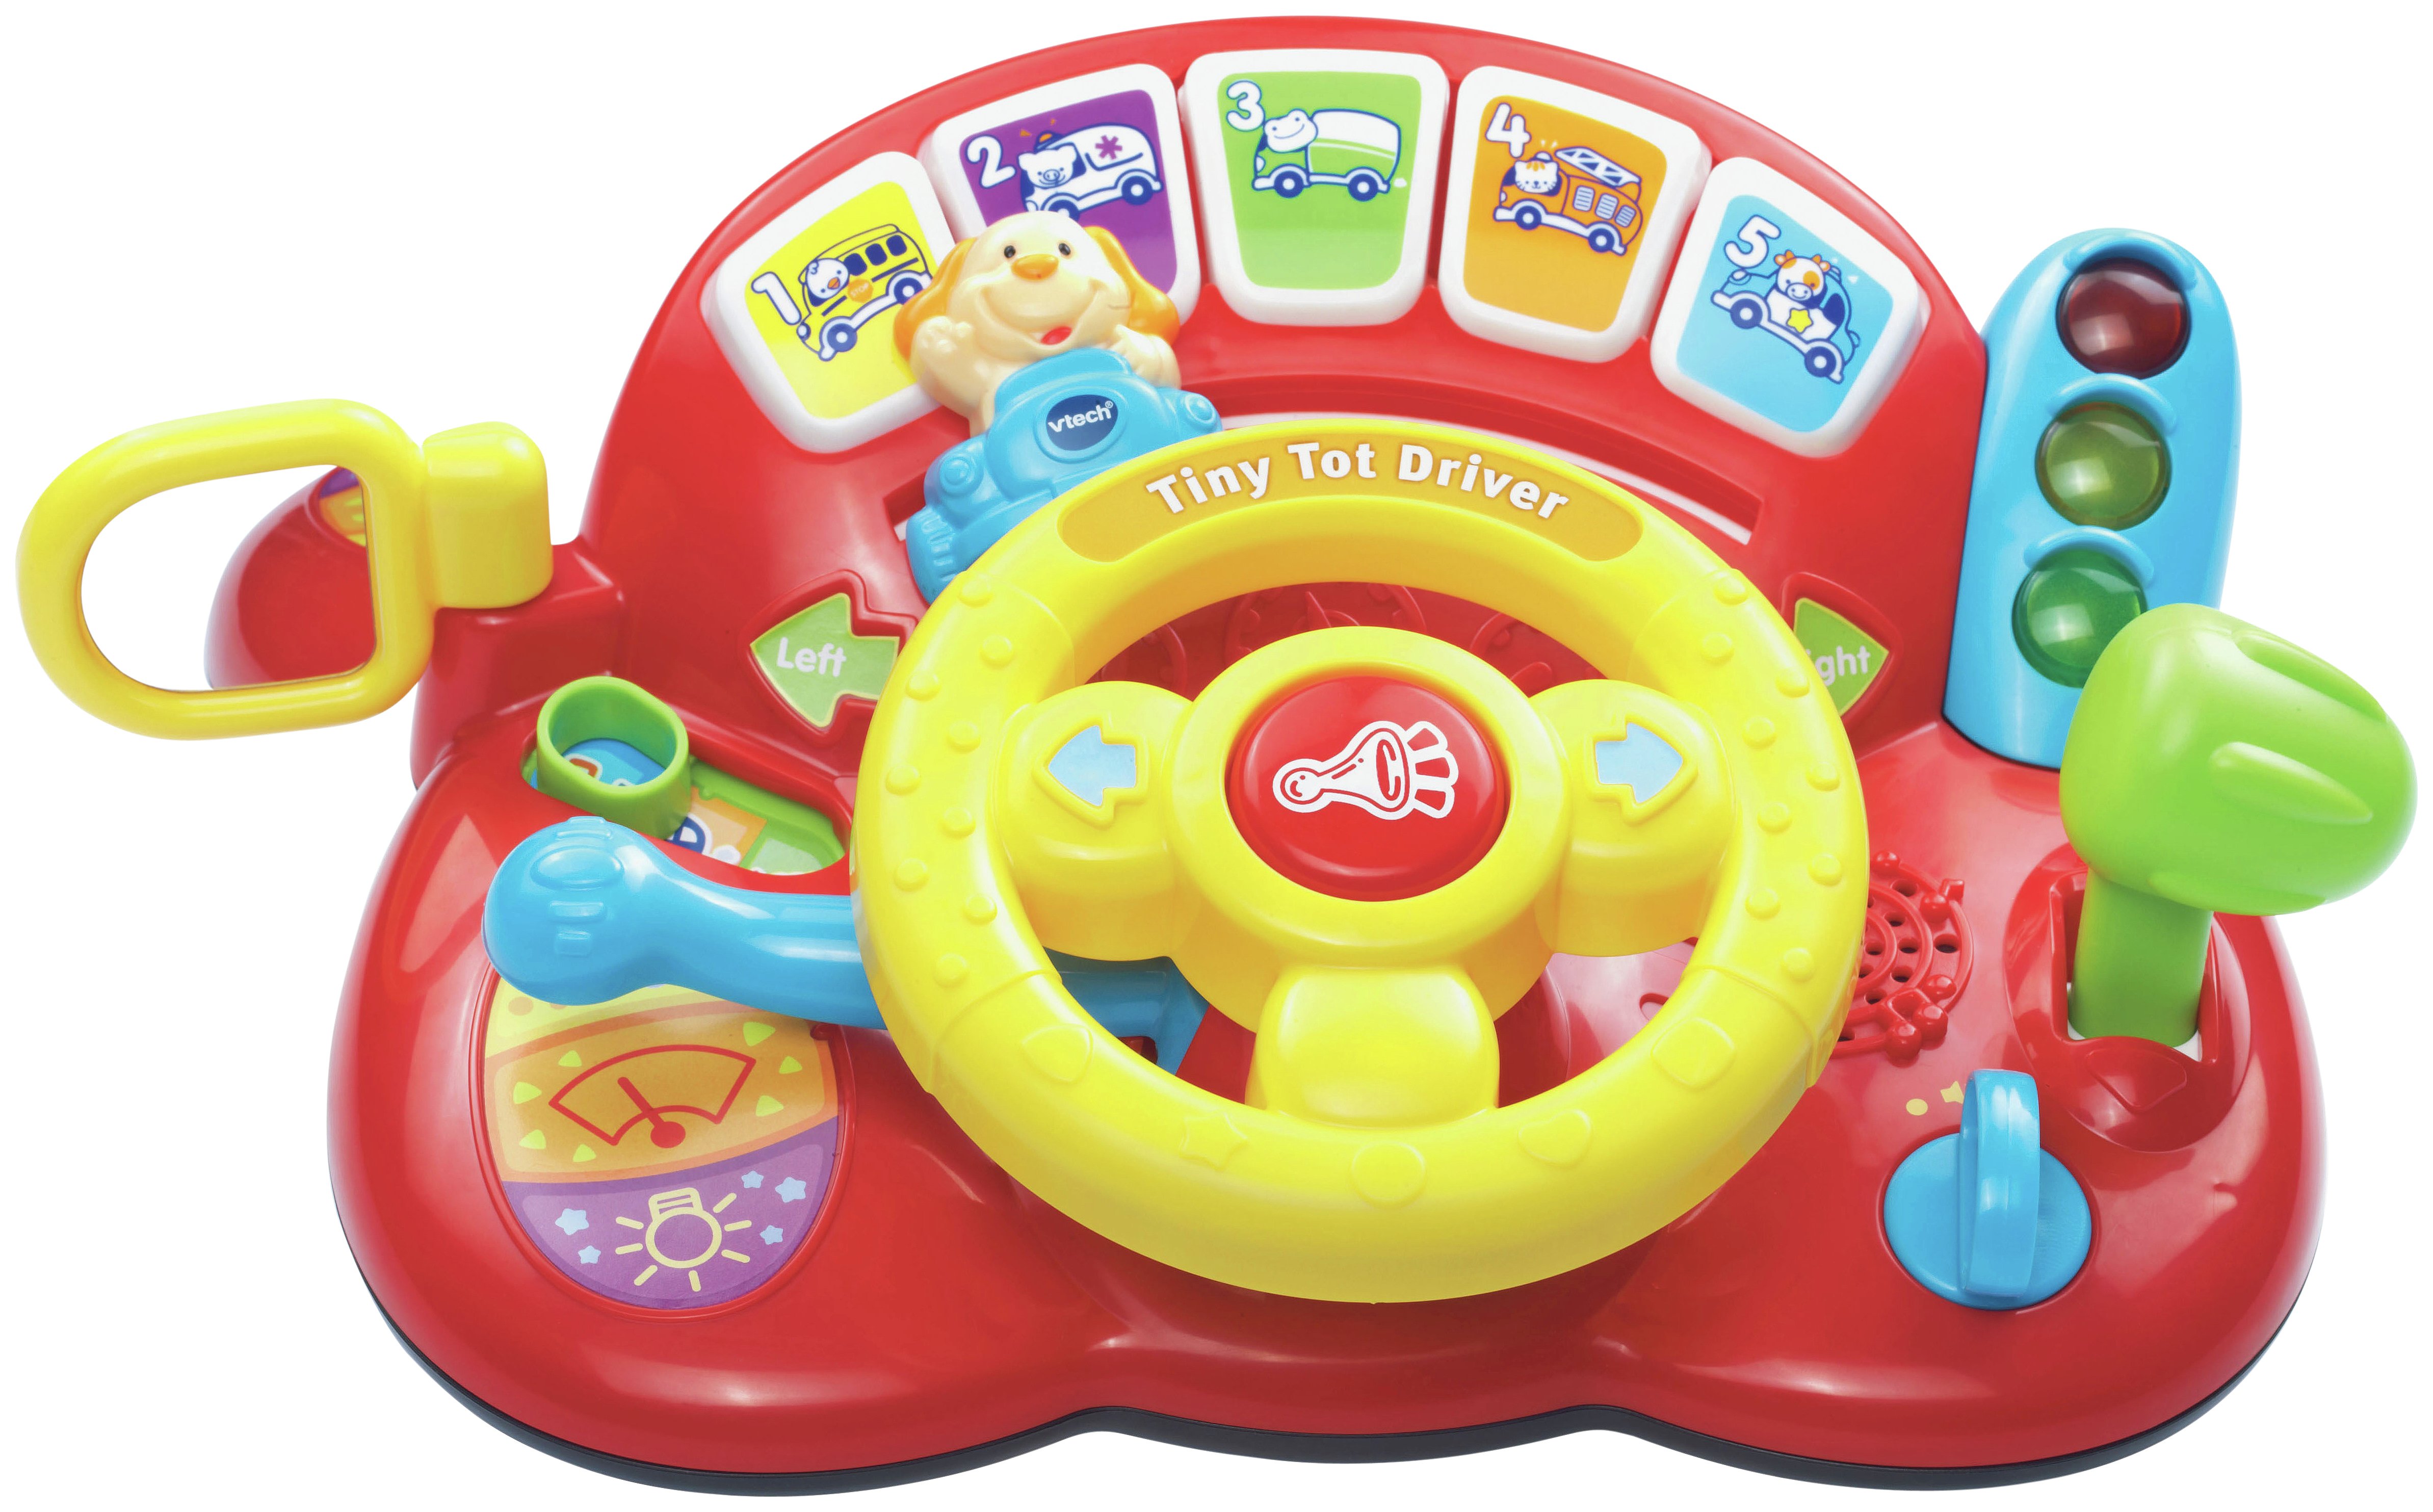 KiddoLab “My Little Driver” Musical Activity Toy Steering Wheel Baby Driver Light and Sound Car Steering Wheel Toy.Mini Driving Musical Educational Learning Toy Ages 3 Months+